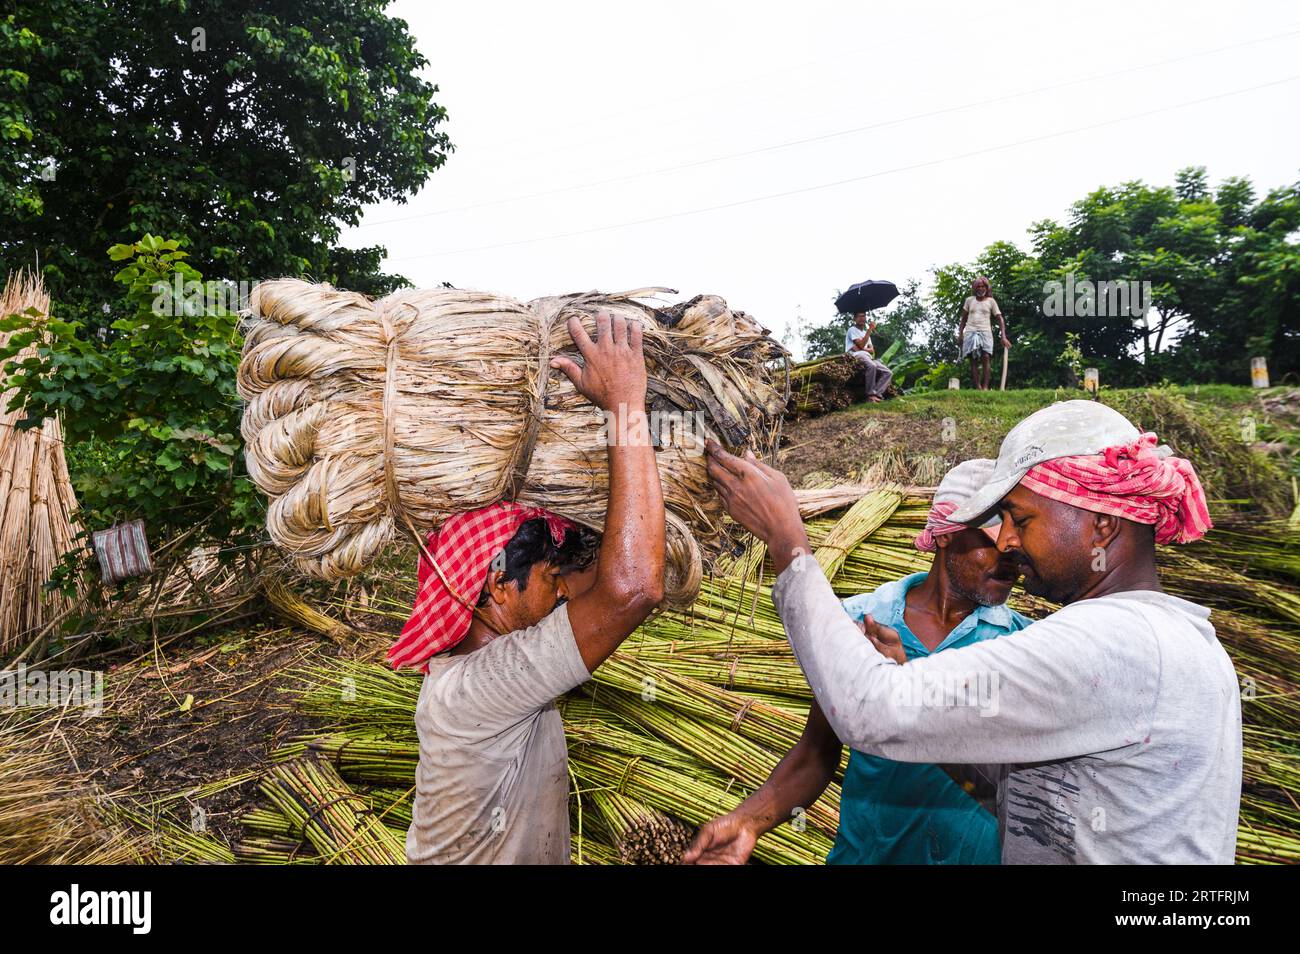 The Asia Pacific region, led by major jute producer India, dominates the Jute Bags Market. India's rich production capabilities, coupled with the global shift towards eco-friendly alternatives, have contributed to the region's leadership.  Here Jute is cut and tied to the banks of the Jalangi River for shedding leaves and some of the fiber from the jute rotting in river water is taken by laborers to be dried before sale at the market. Tehatta, West Bengal, India. Stock Photo